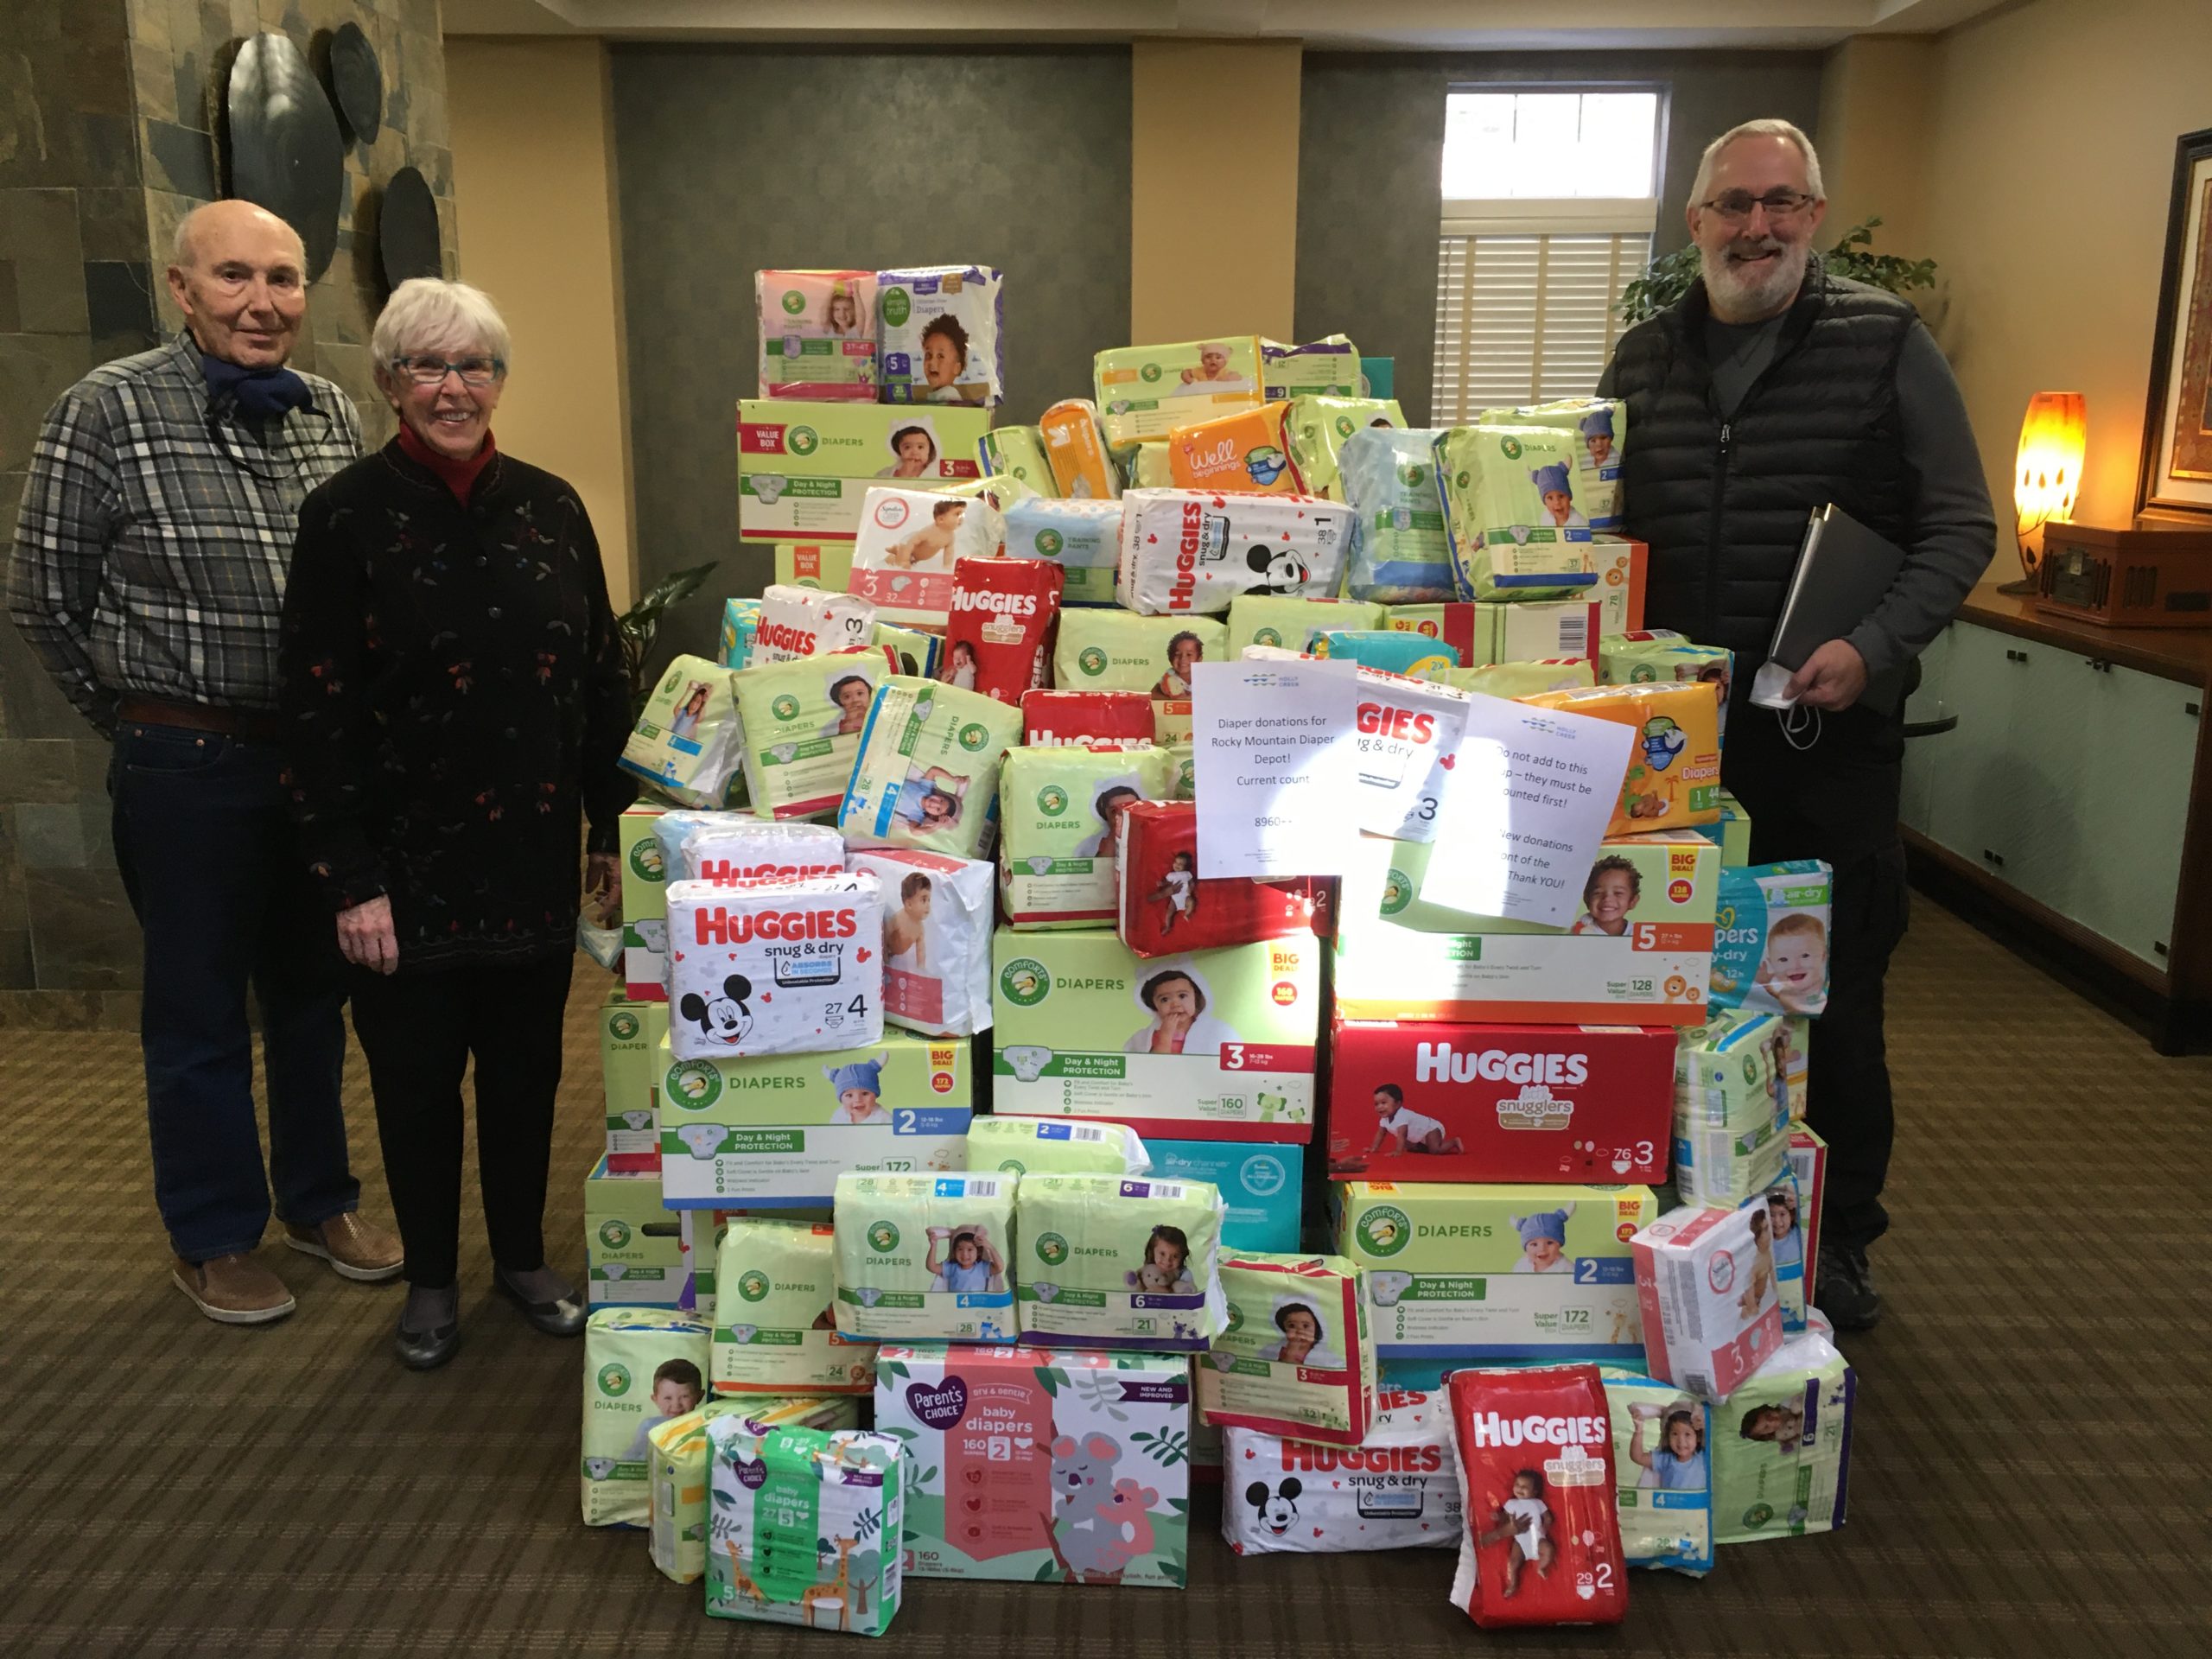 Holly Creek Diaper Donation Drive